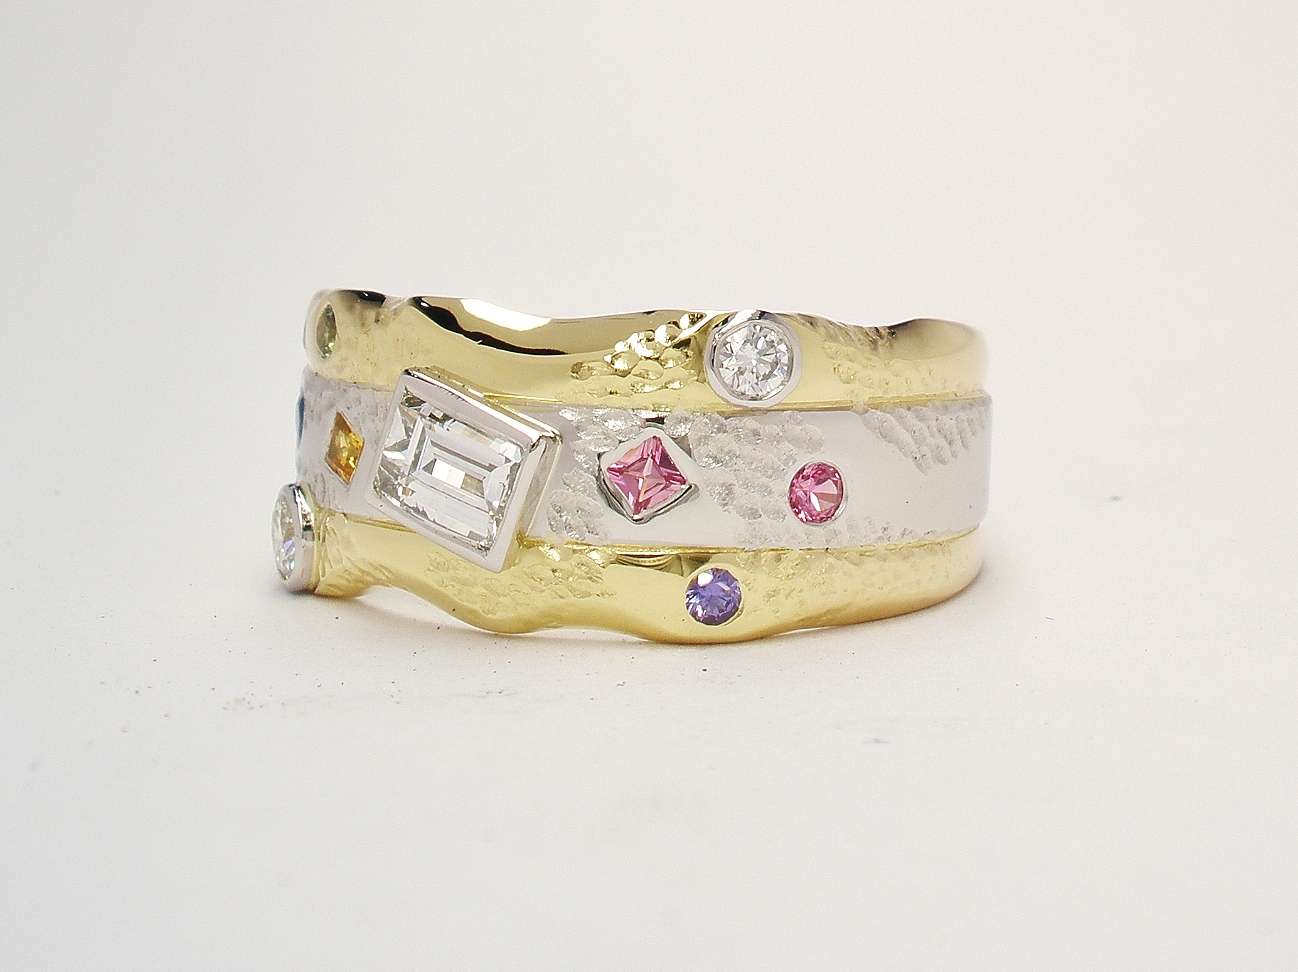 An 11 stone diamond and multi coloured sapphire broad ring mounted in 18ct. yellow gold and platinum.